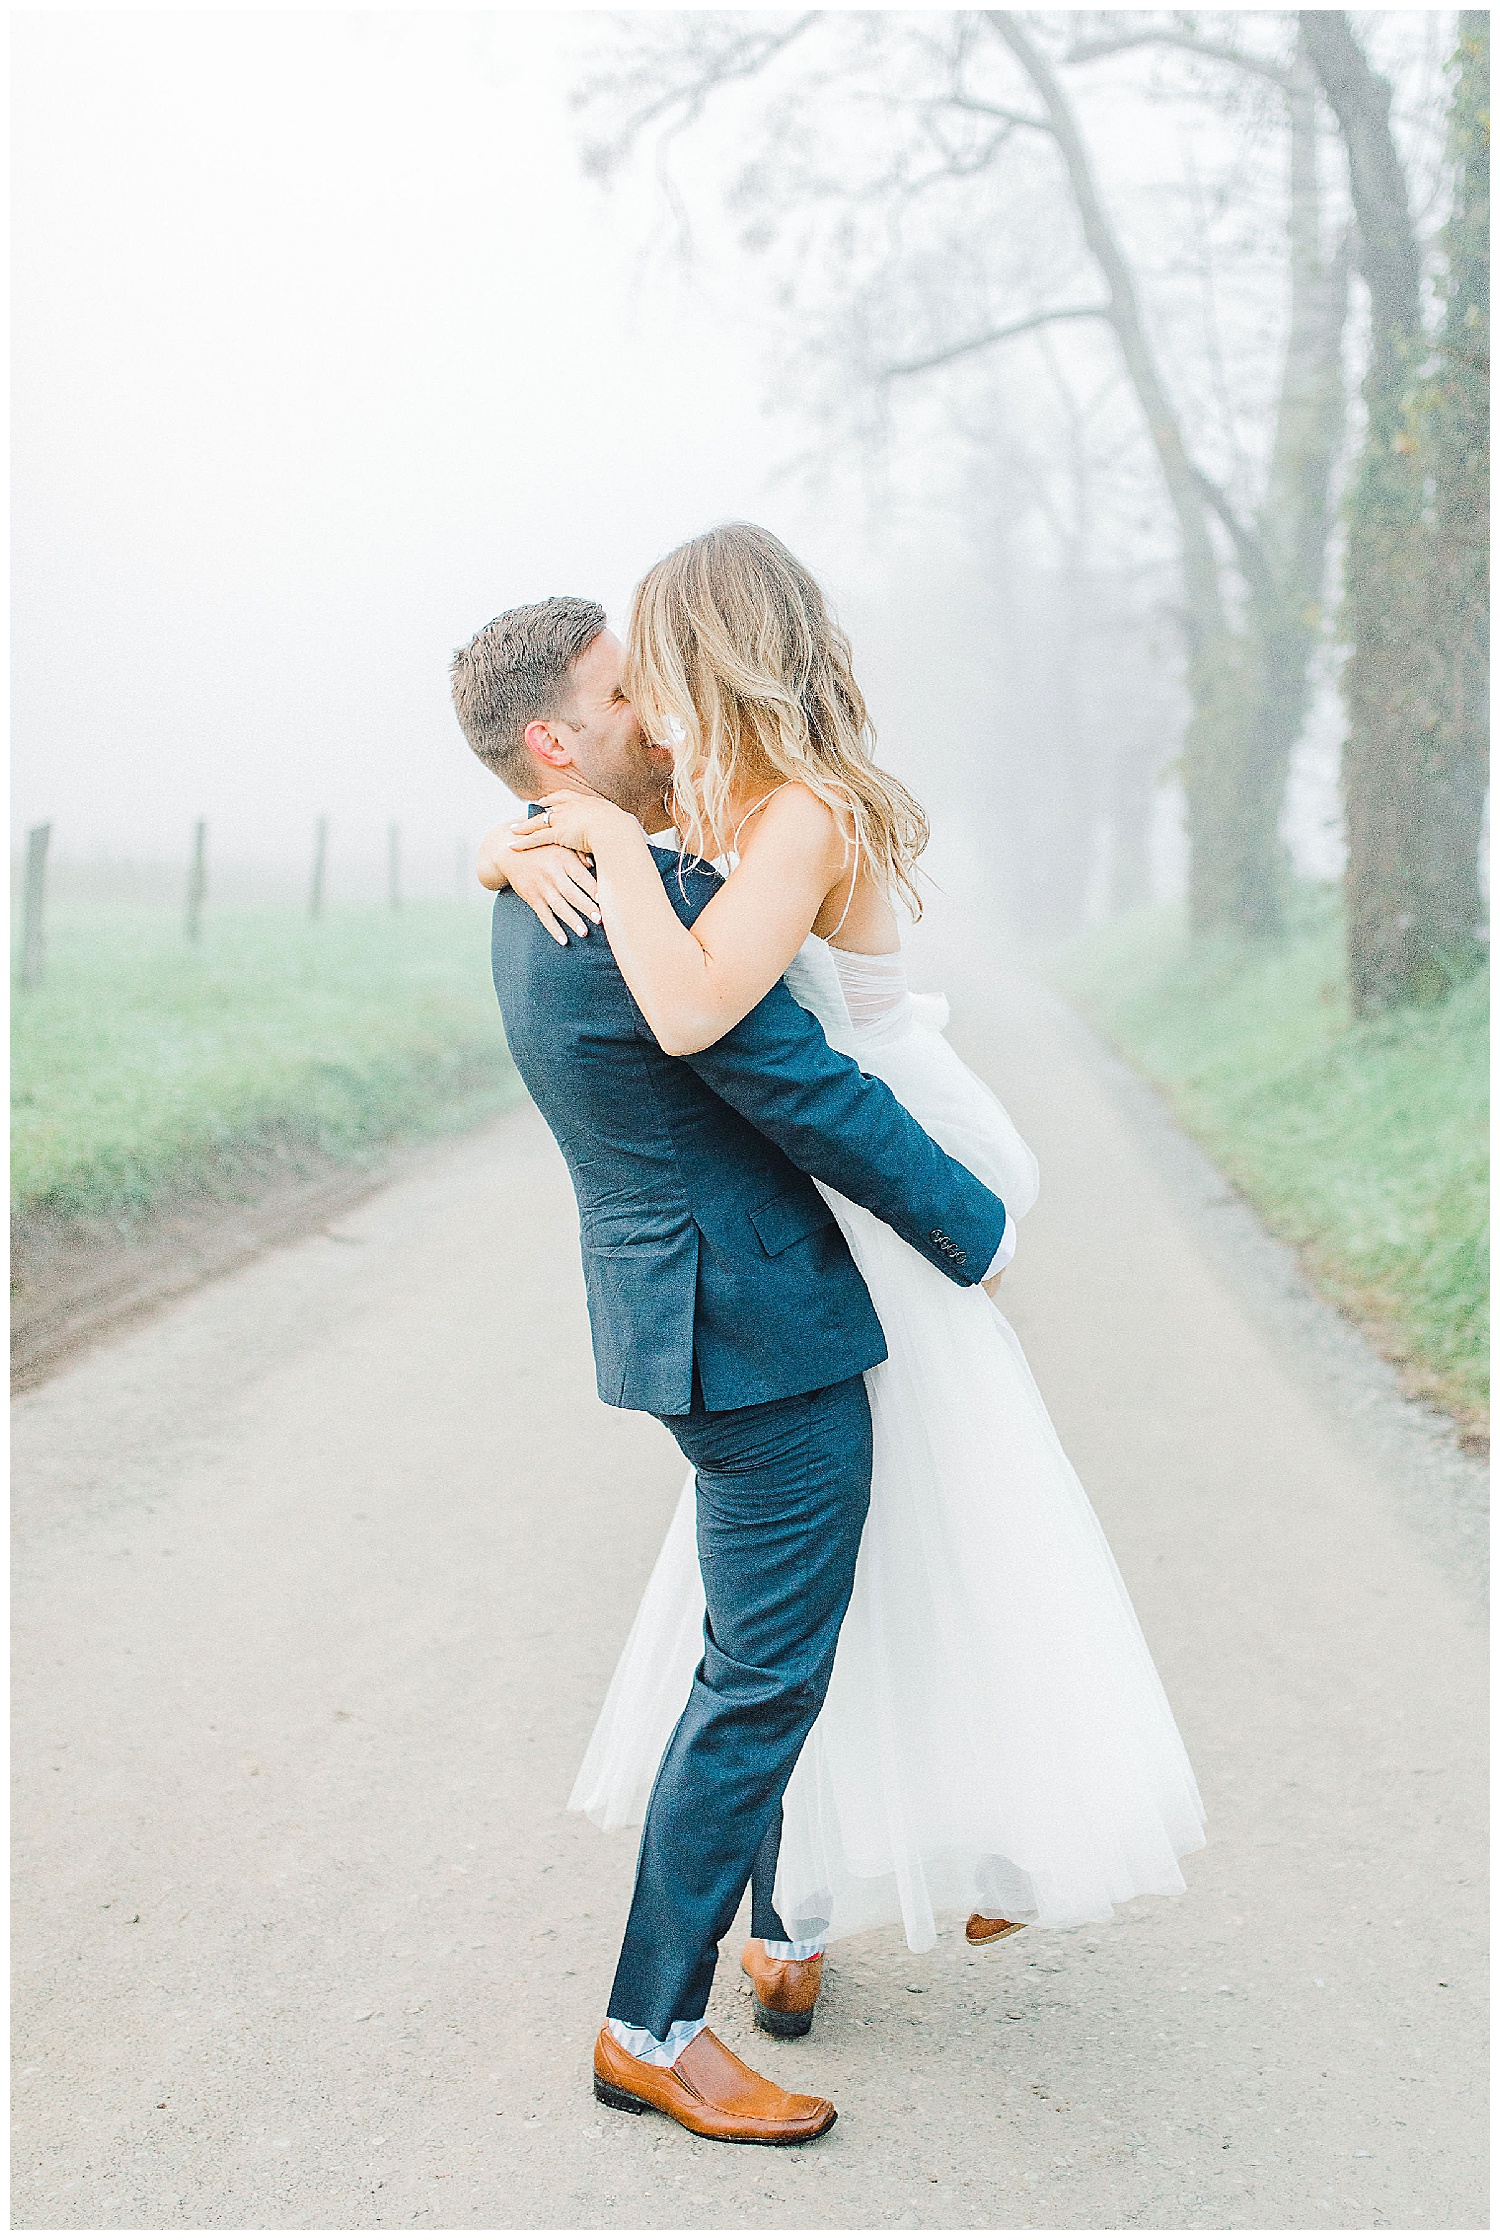 Emma Rose Company recently got to travel all the way to Nashville to photograph the most beautiful post-wedding bride and groom portraits in the Great Smoky Mountains with a gorgeous couple! Nashville wedding inspiration at it's finest._0011.jpg